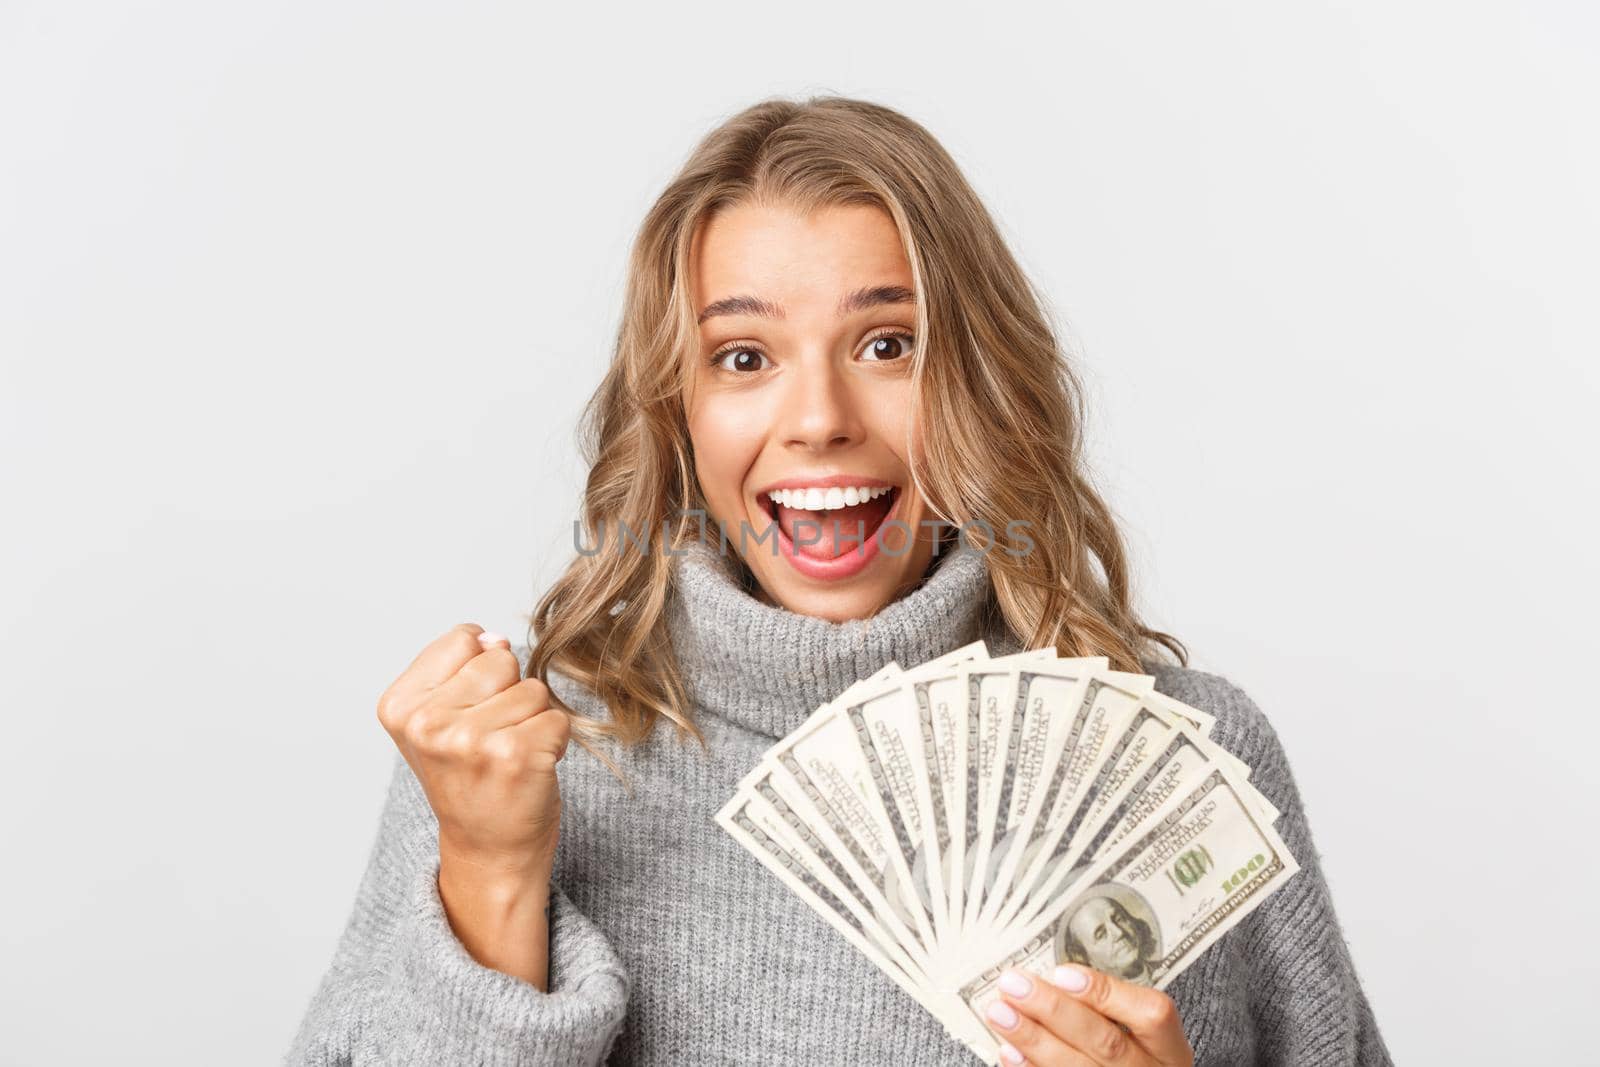 Close-up of successful and rich blond girl in grey sweater, holding money and looking like winner, standing over white background.